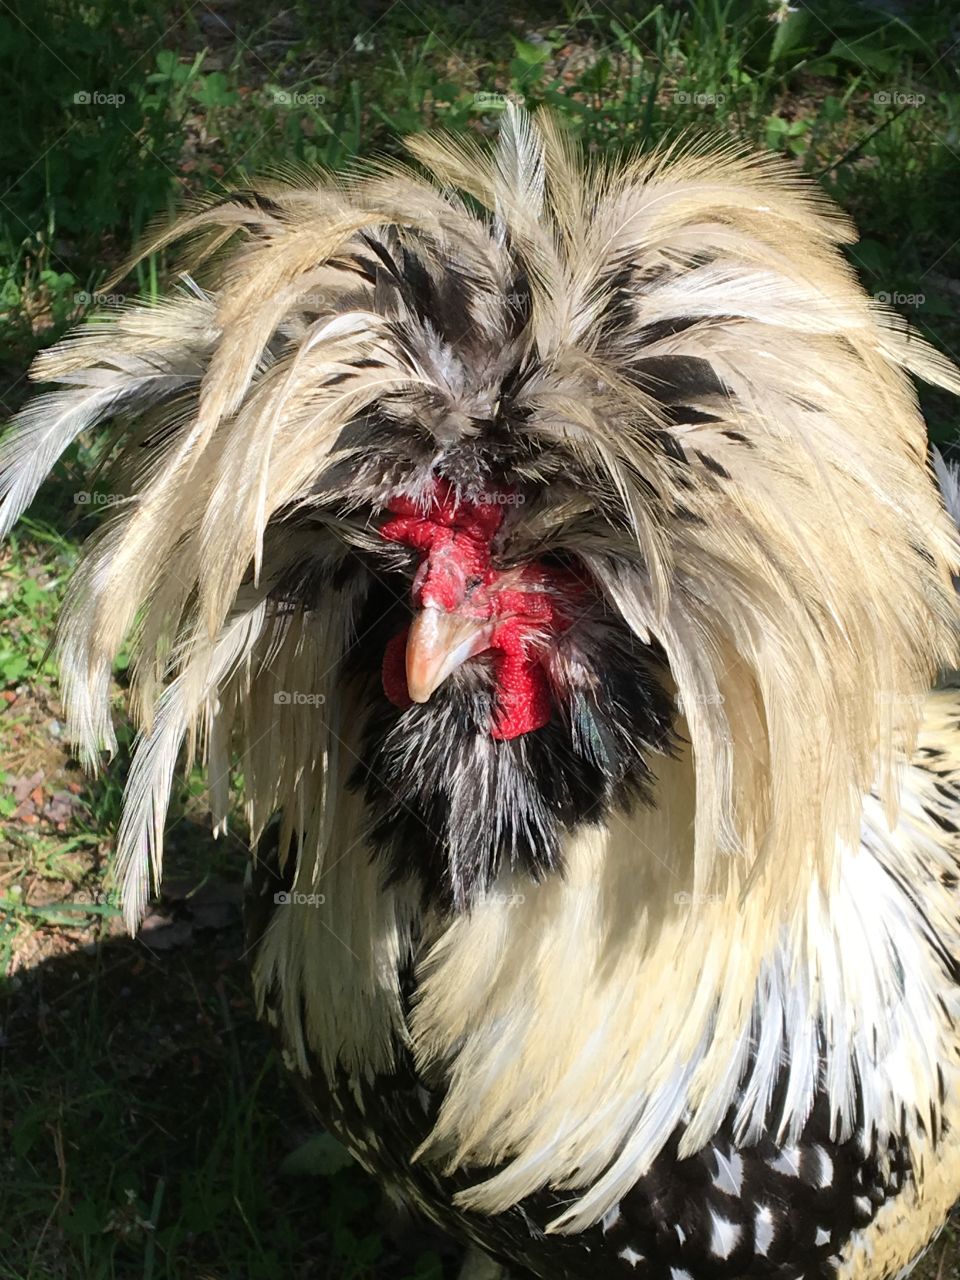 Roosters hair-do